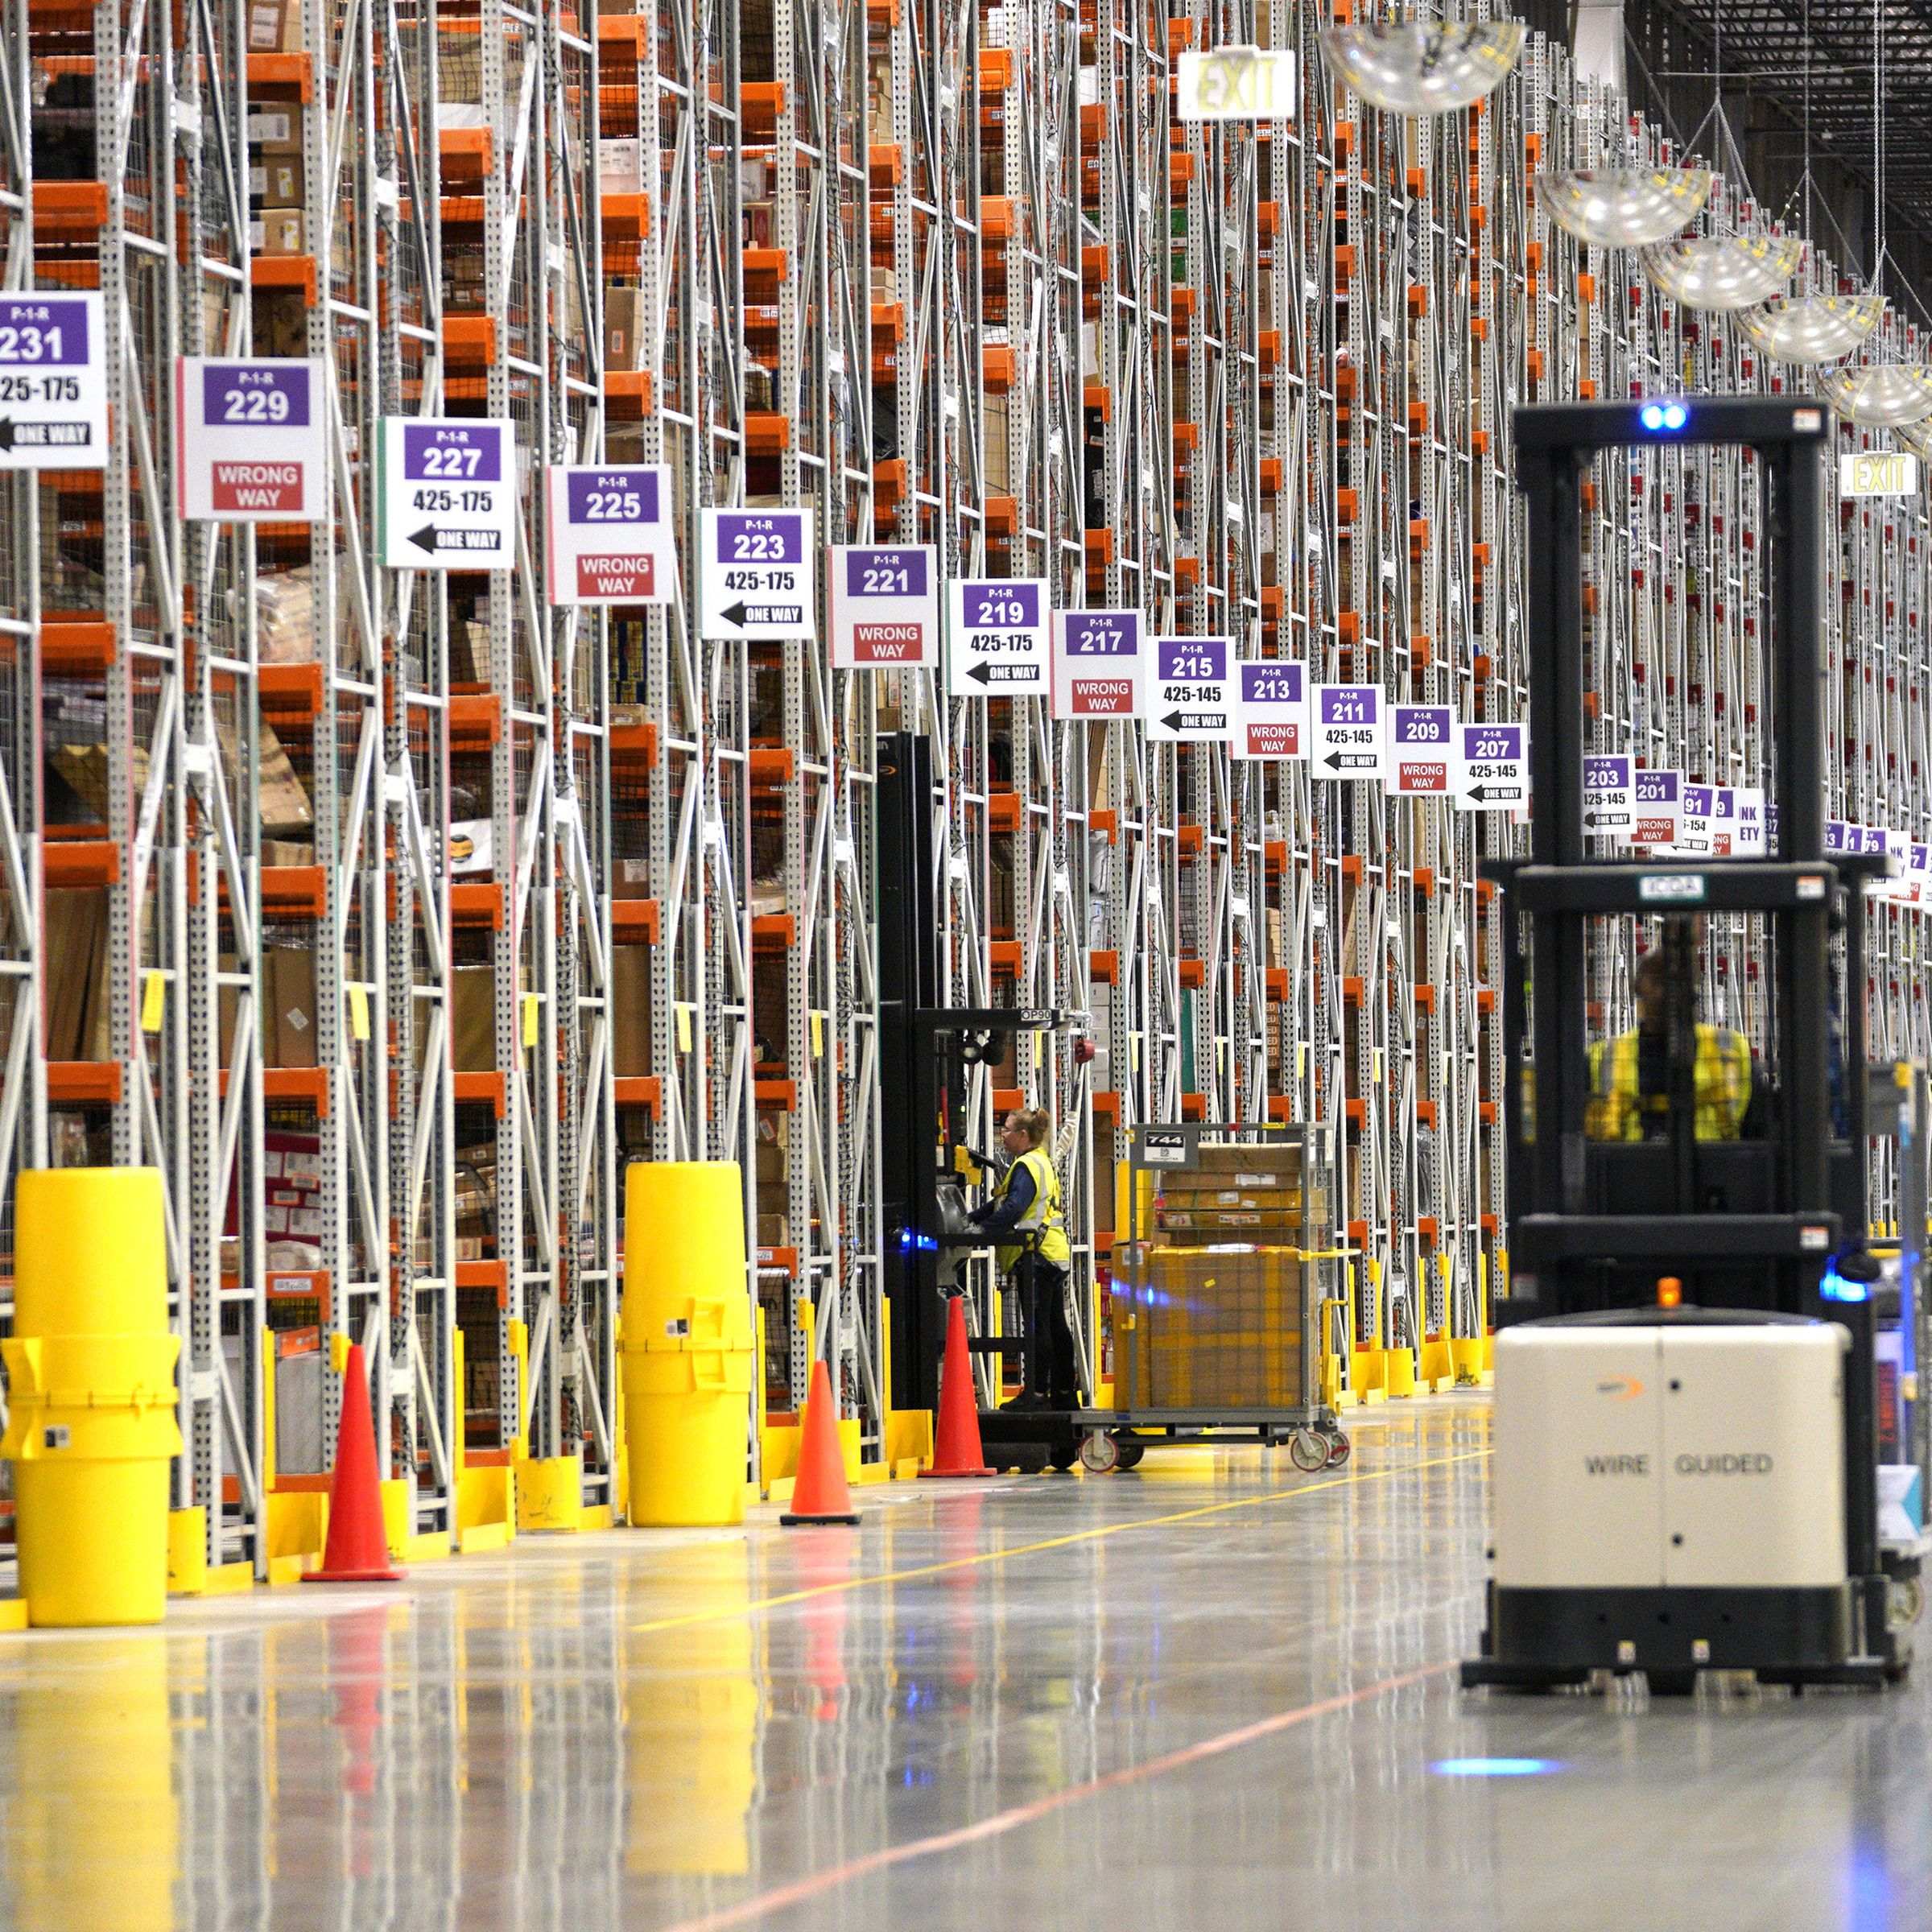 A worker drives a fork lift inside a warehouse past rows of shelves filled with packages.